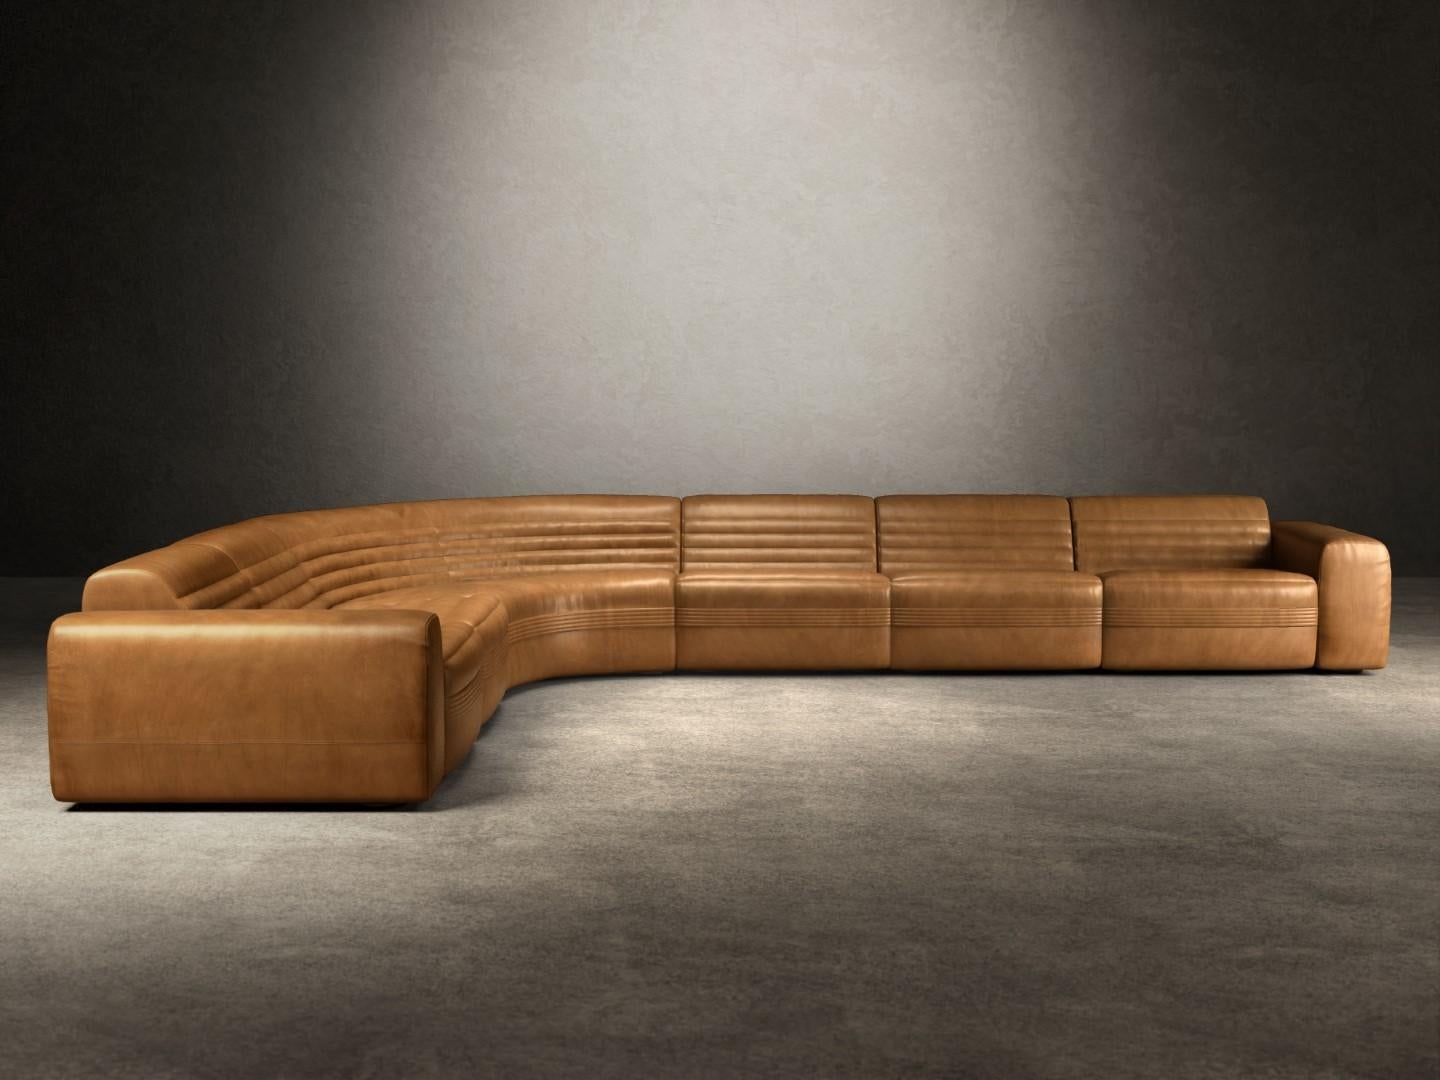 Vicious is a modular sofa composed of 4 modular elements: terminal module, central module, corner module and chaise longue. Vicious sofa is composed of a woode frame upholstered with high-density foamed polyurethane, and a top layer of goose down to